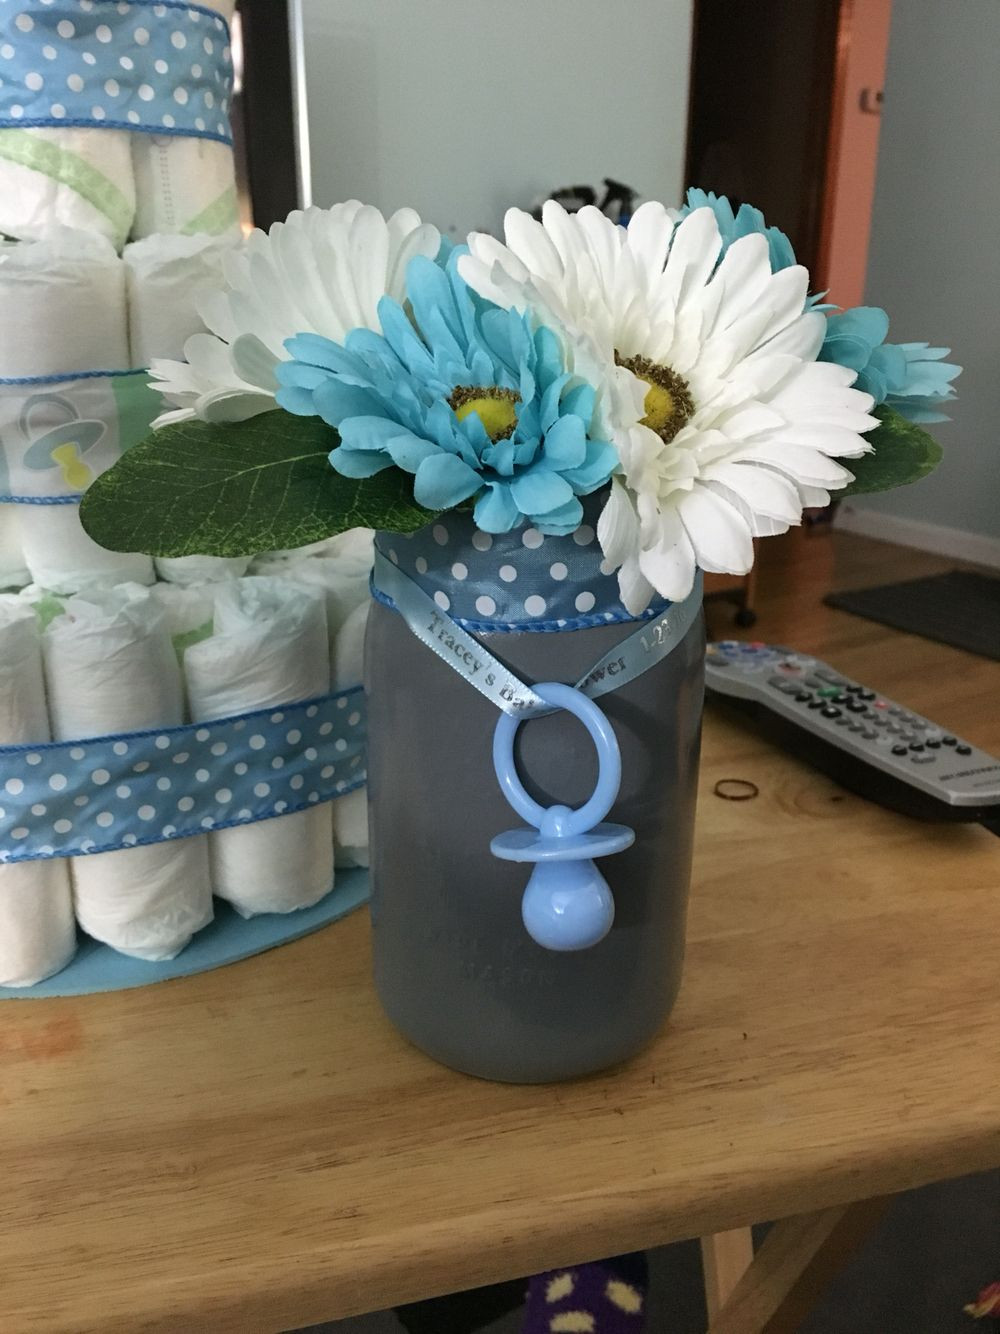 DIY Baby Shower Ideas For A Boy
 Spectacularly Beautiful Baby Shower Flowers Any Bud